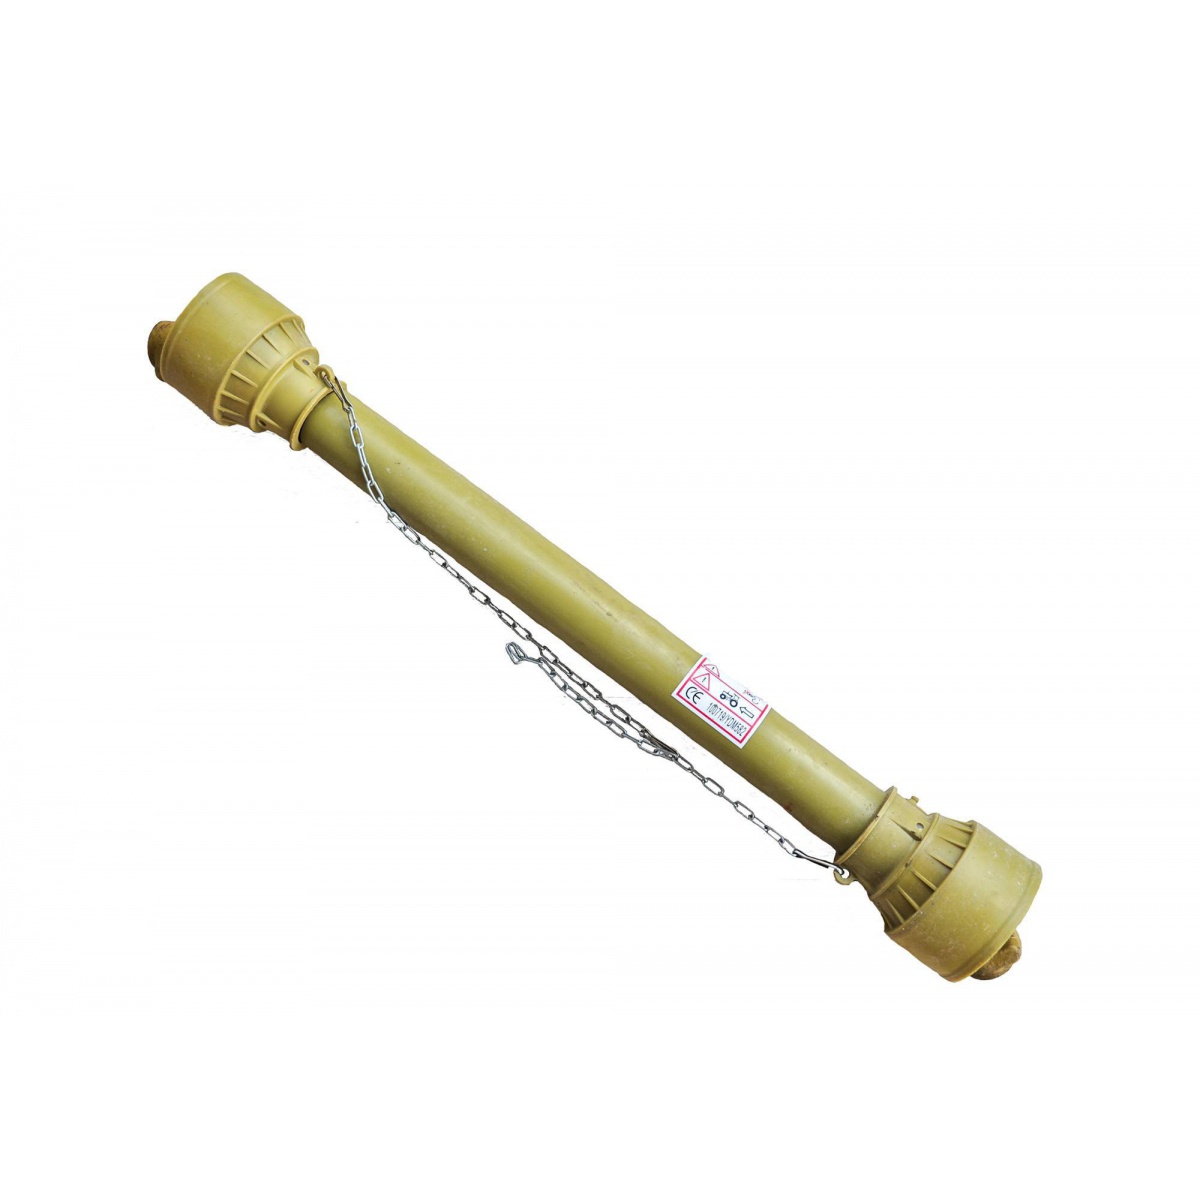 PTO shaft 025B - 50cm / up to 24 HP